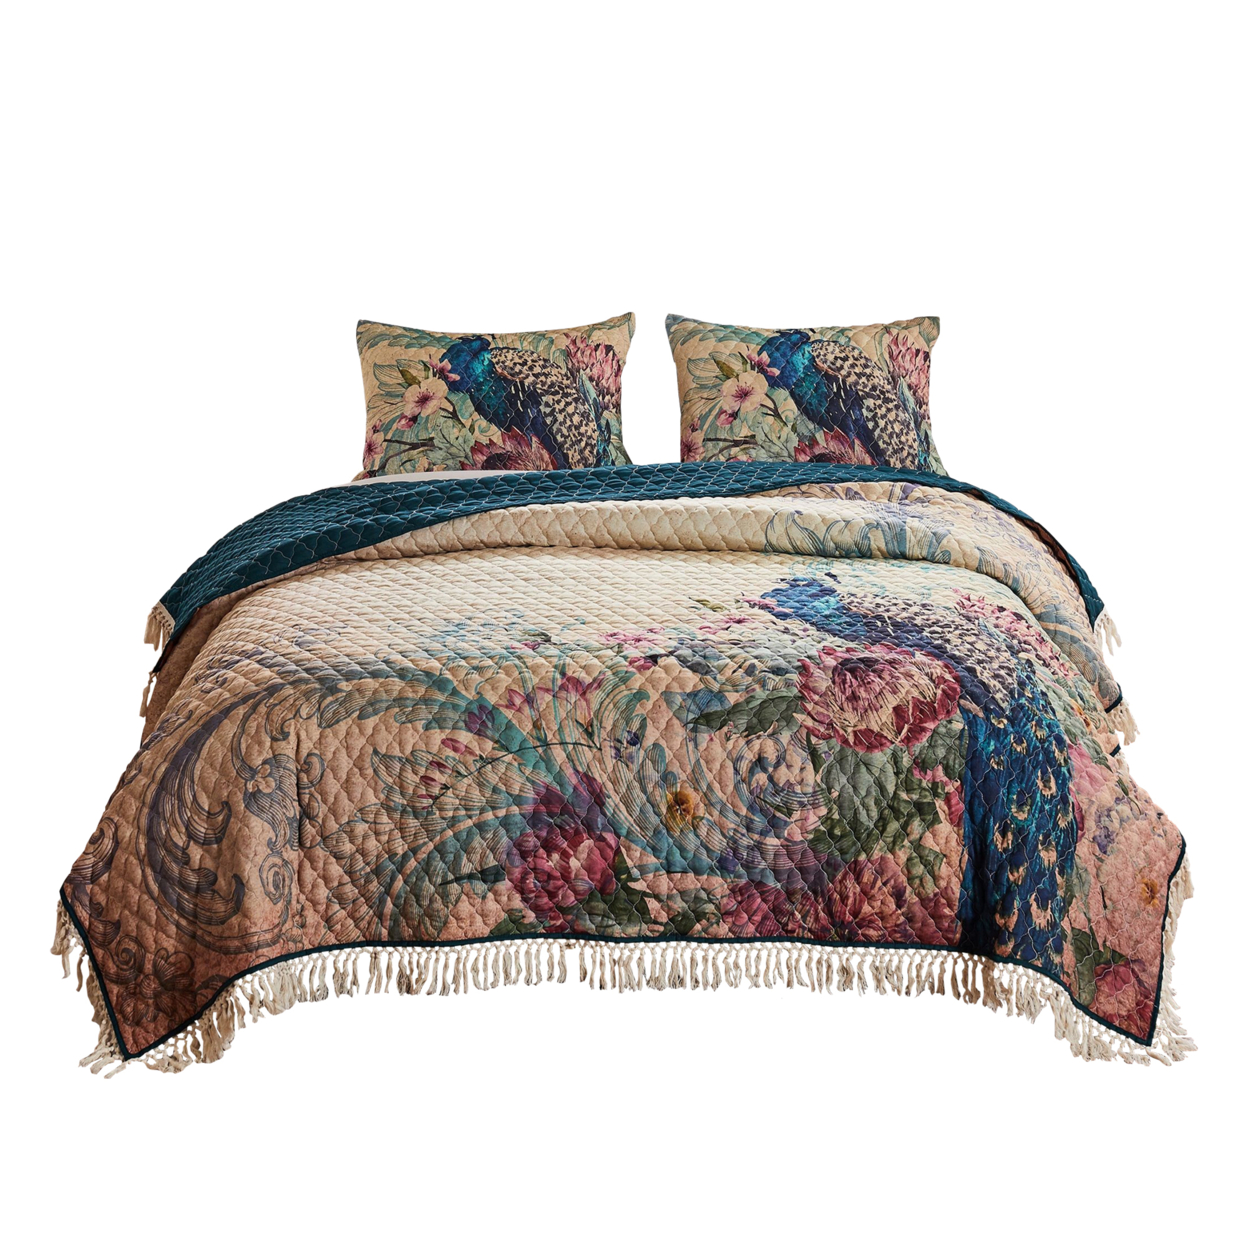 3 Piece King Size Quilt Set With Floral Print And Crochet Trim, Multicolor- Saltoro Sherpi